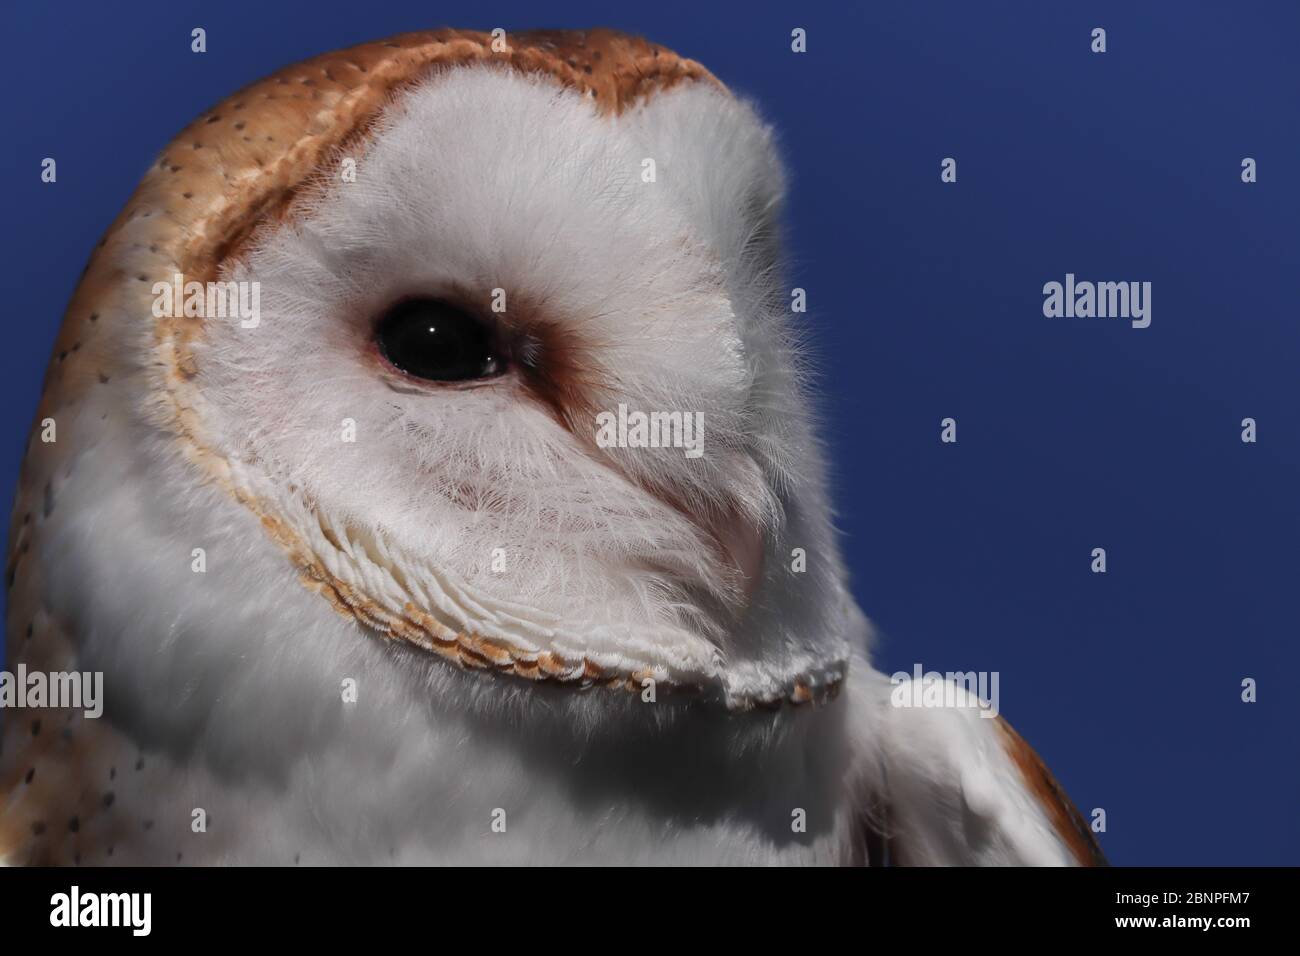 Close up of the beautiful head of a barn owl (Tyto alba) with its heart-shaped white facial disc against a blue sky. Beak, dark eye, copy space. Stock Photo